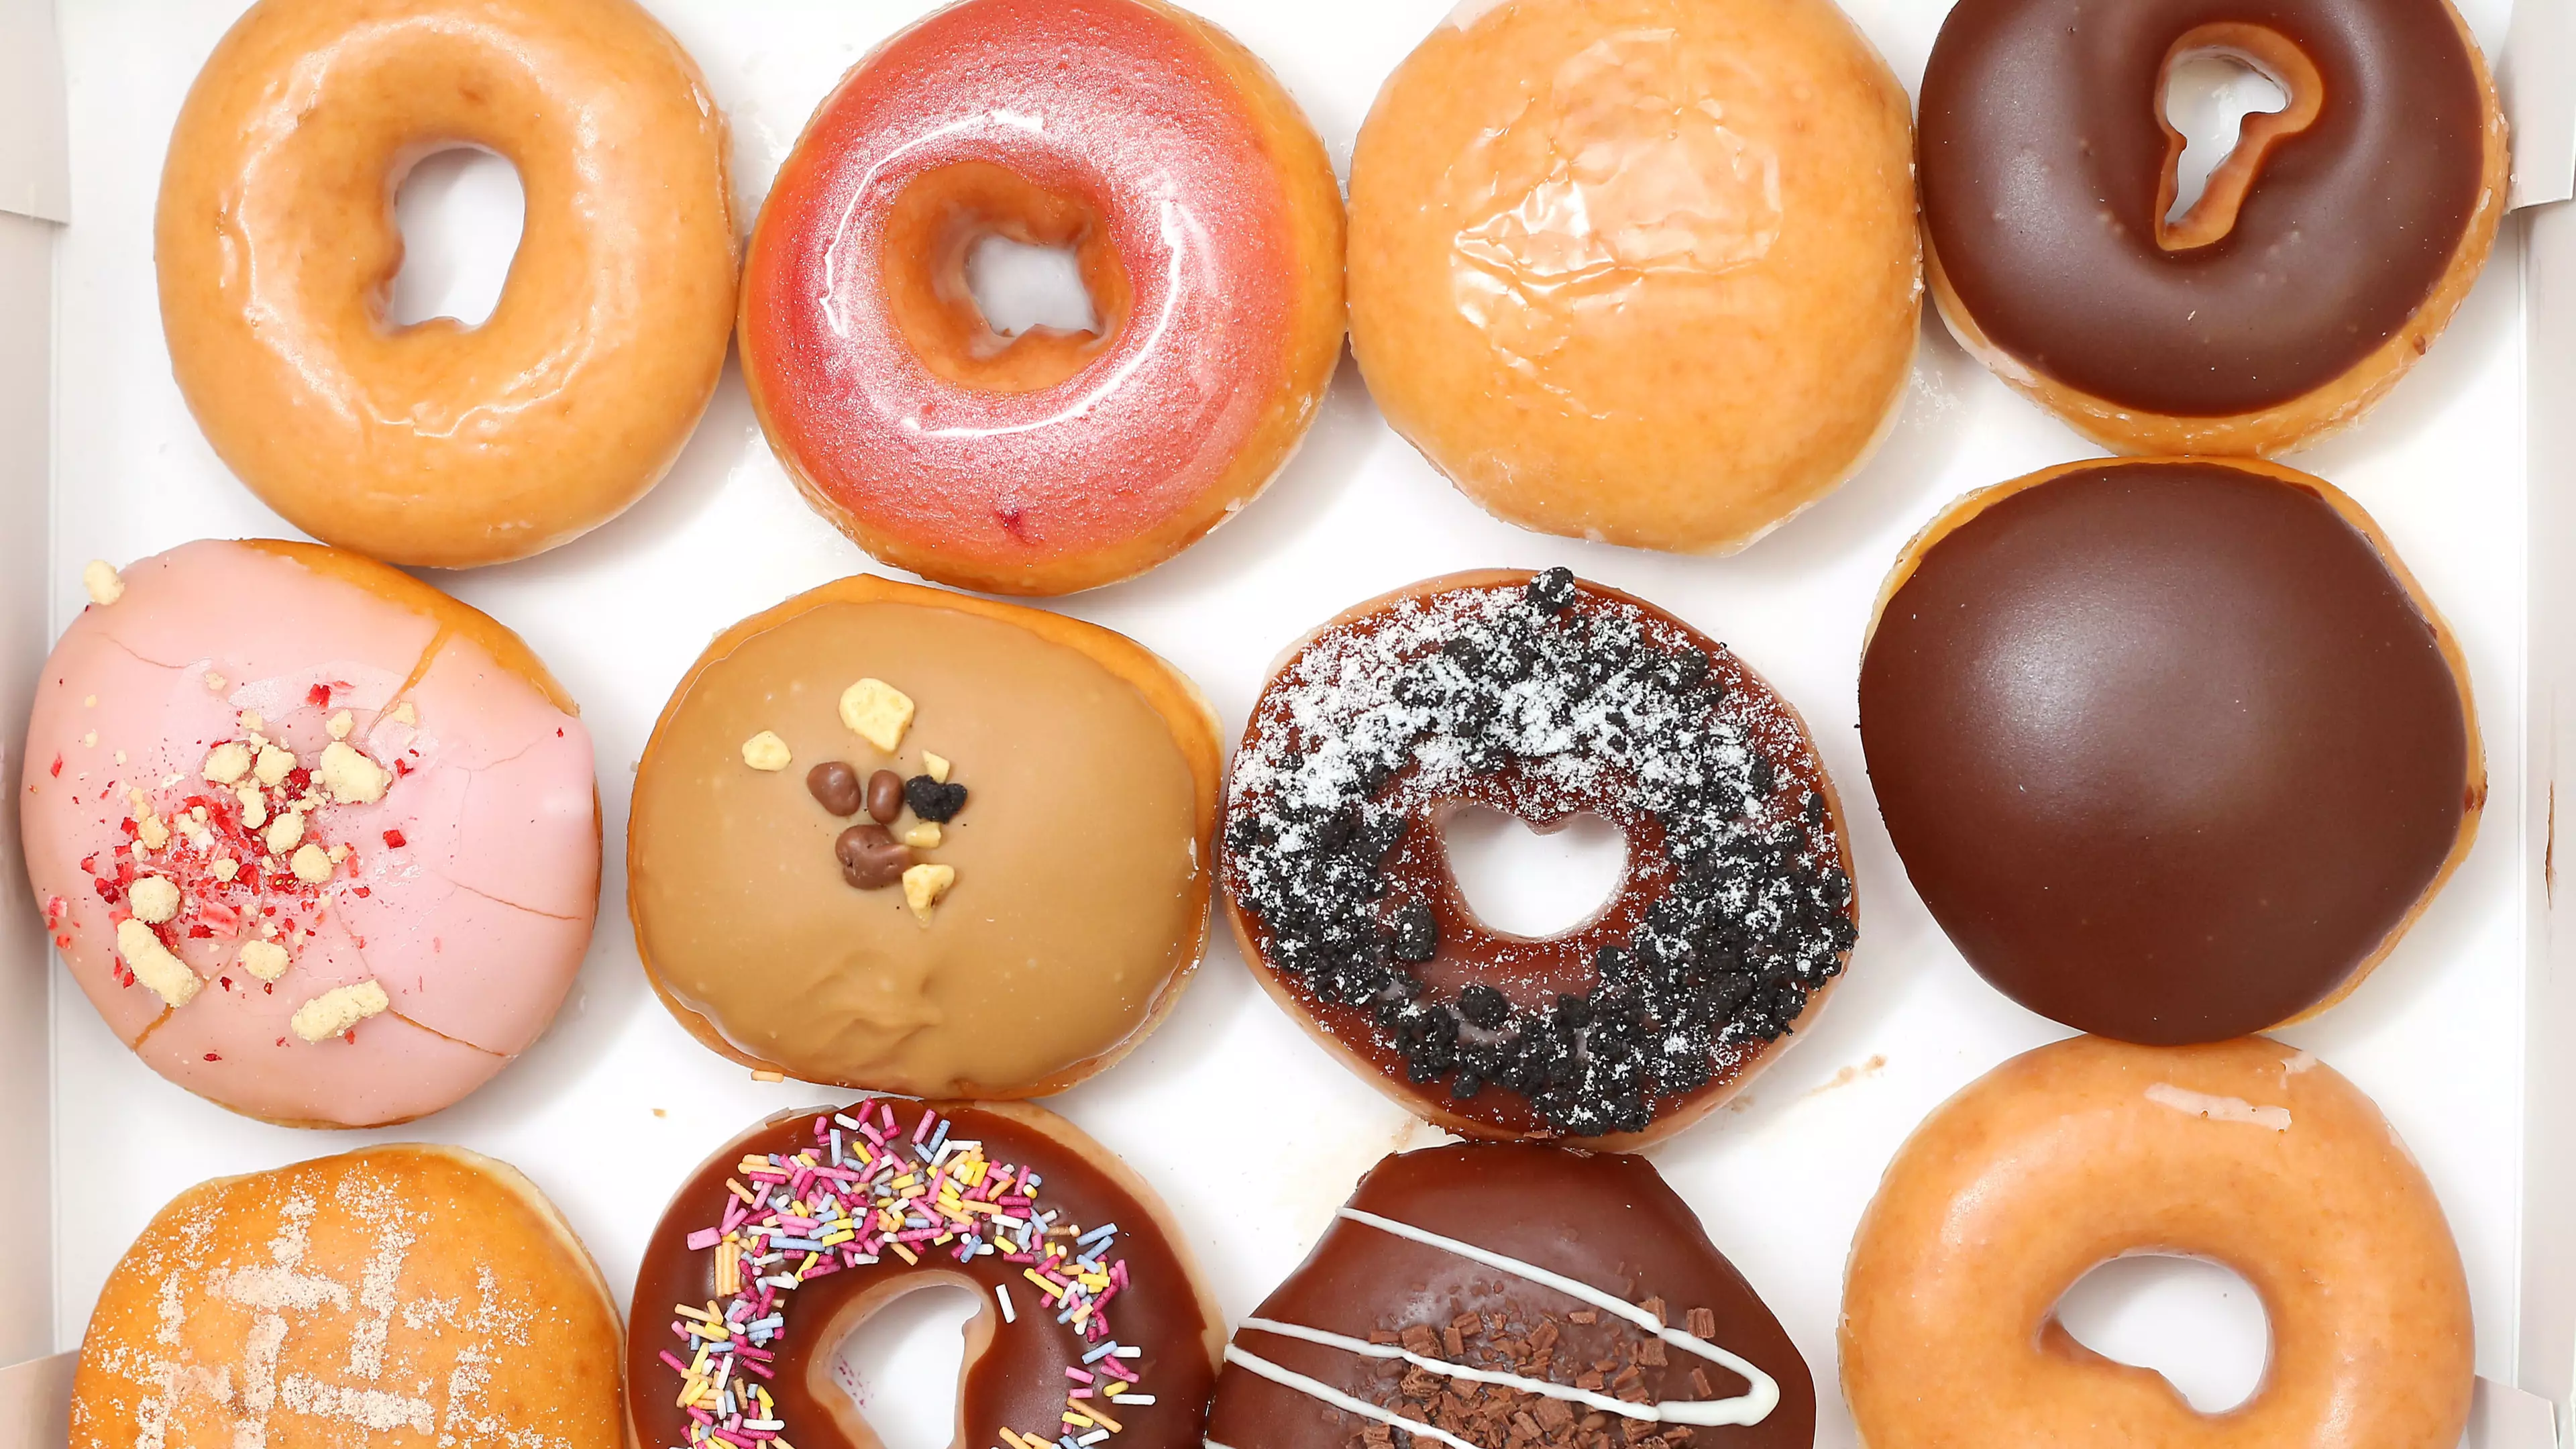 Police Officer Could Be Dismissed For 'Swapping Barcode' On Krispy Kreme Box